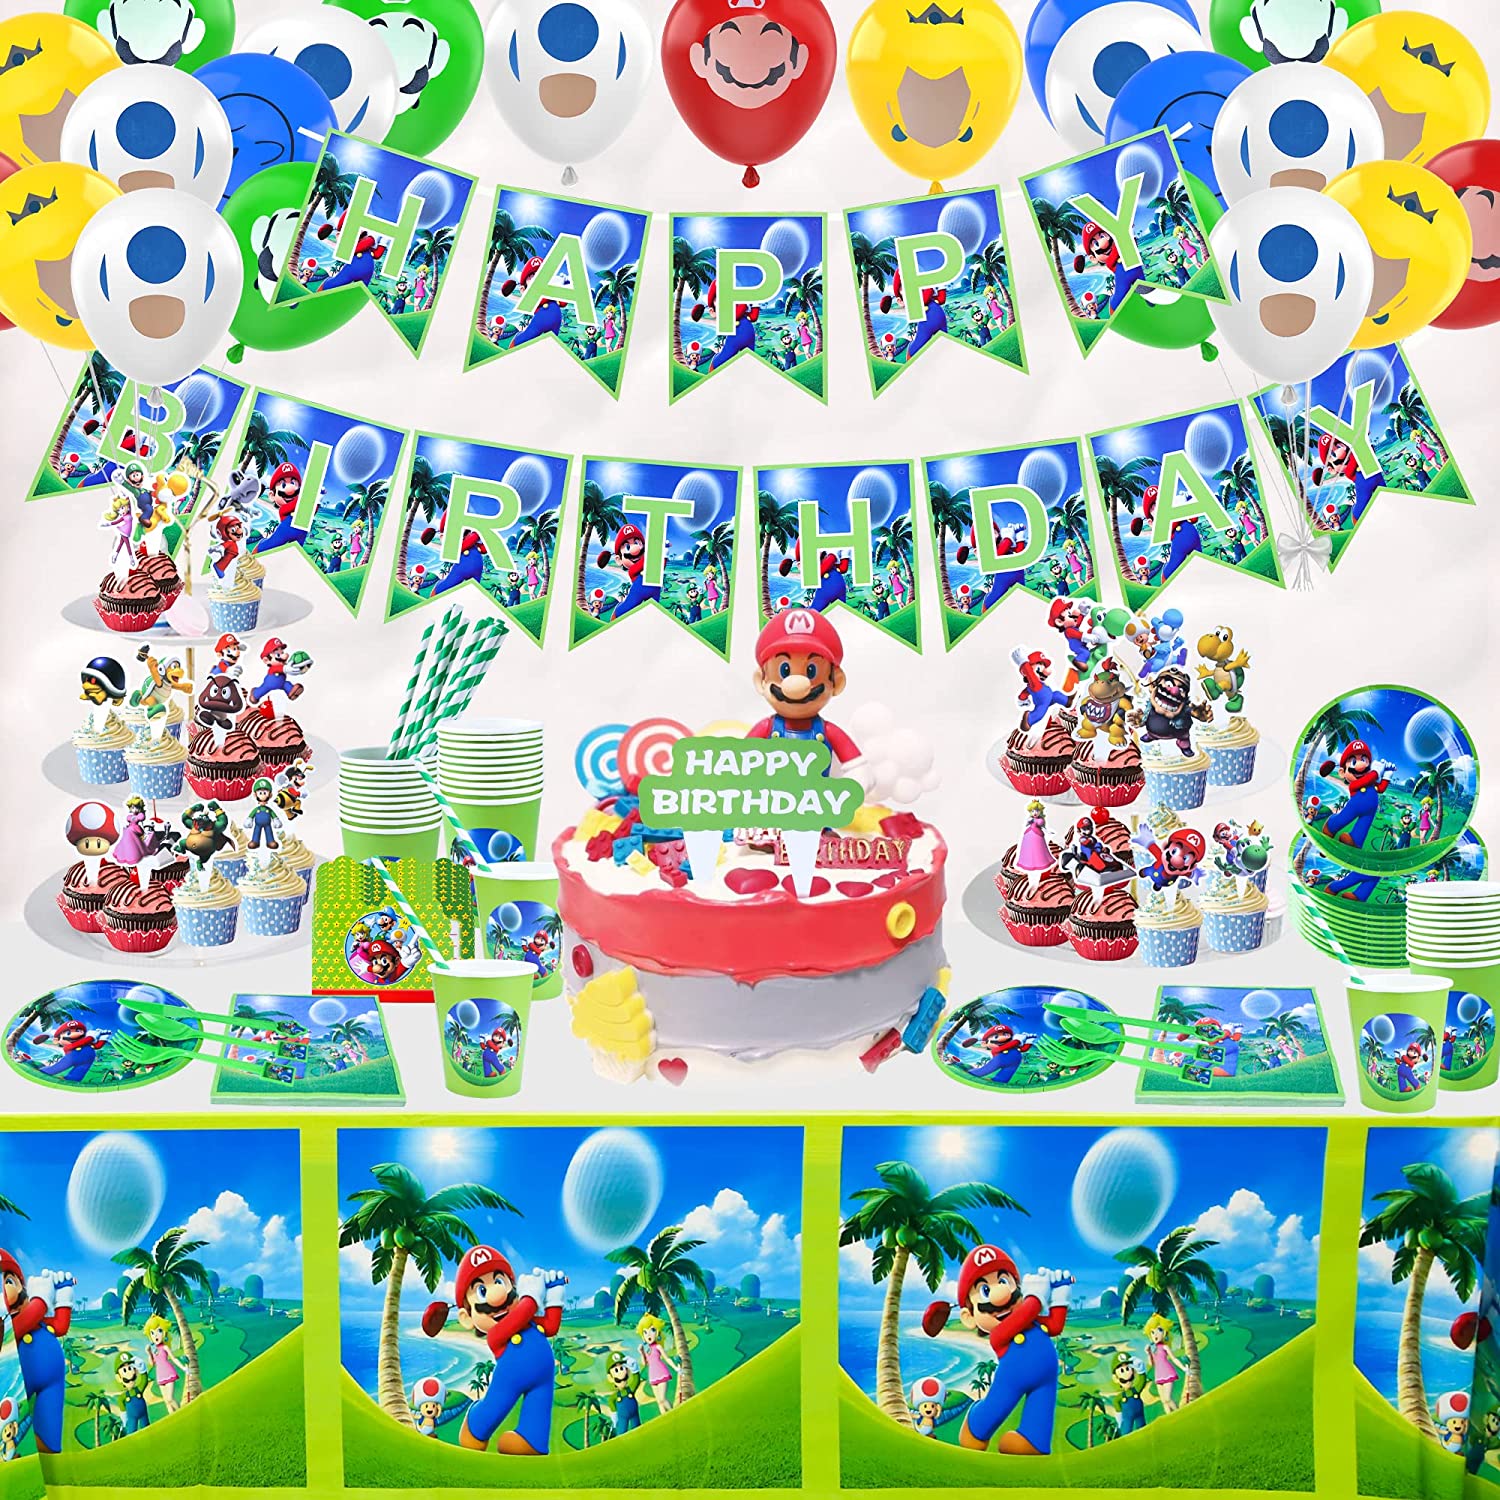 SUPER MARIO PARTY DECORATIONS RANGE TABLEWARE,BALLOONS,CUPS,PLATES,BANNER 